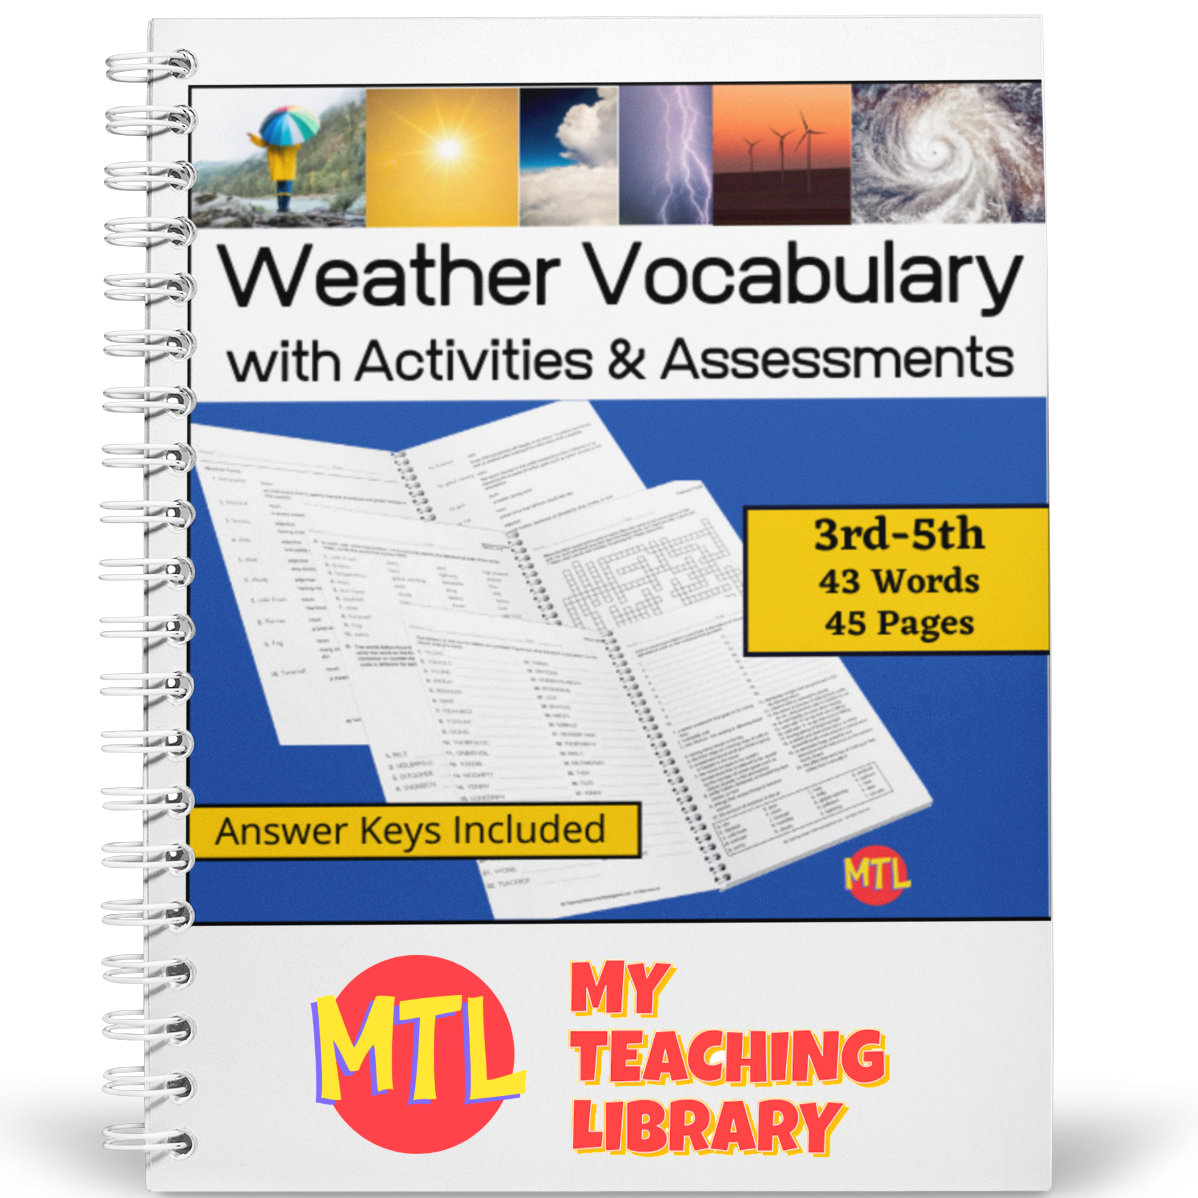 This weather vocabulary unit with activities is designed for 3rd-5th grade classrooms studying weather terms. It includes 43 weather terms with definitions (+ part of speech) plus the following types of activities to help students learn the words and their meanings